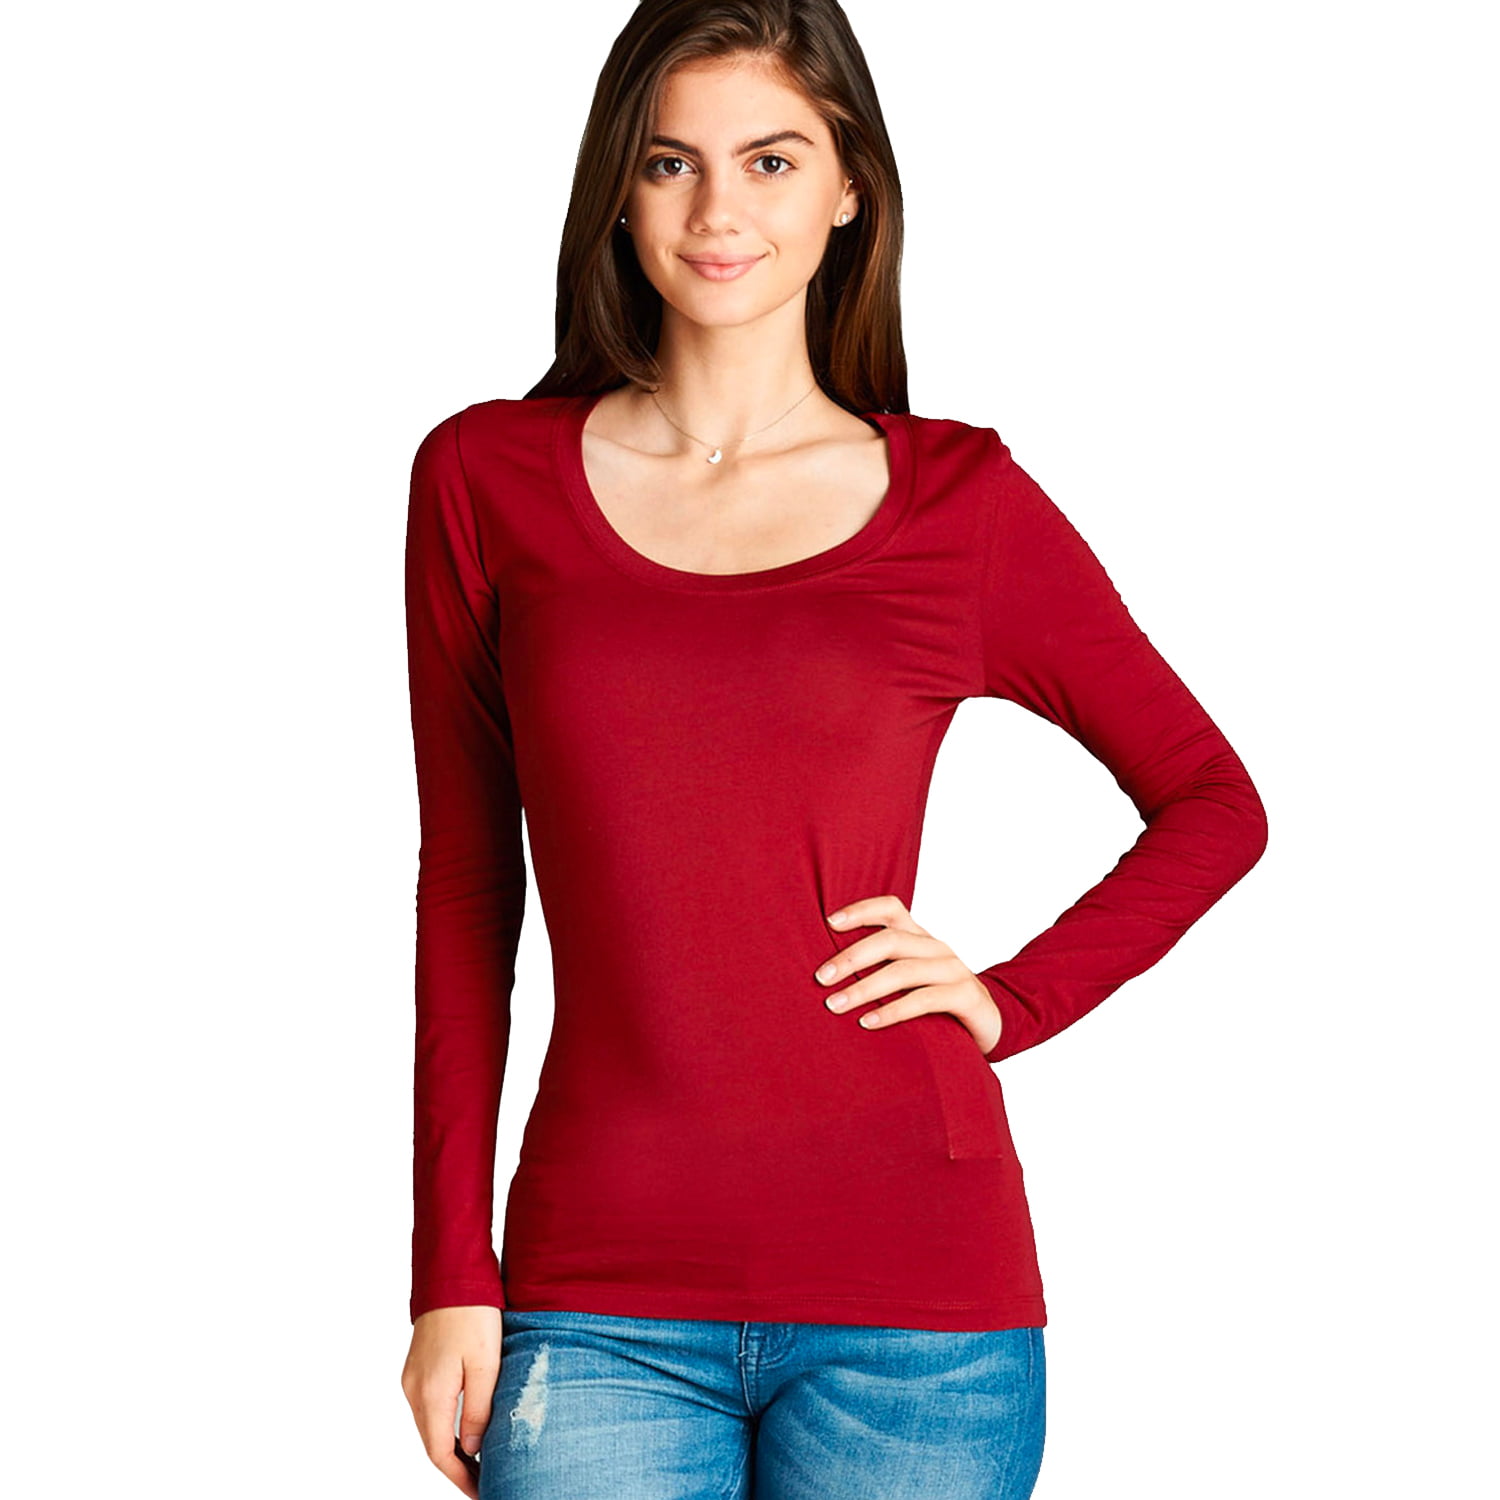 Women's Long Sleeve Scoop Neck Fitted Cotton Top Basic T Shirts-Plus ...